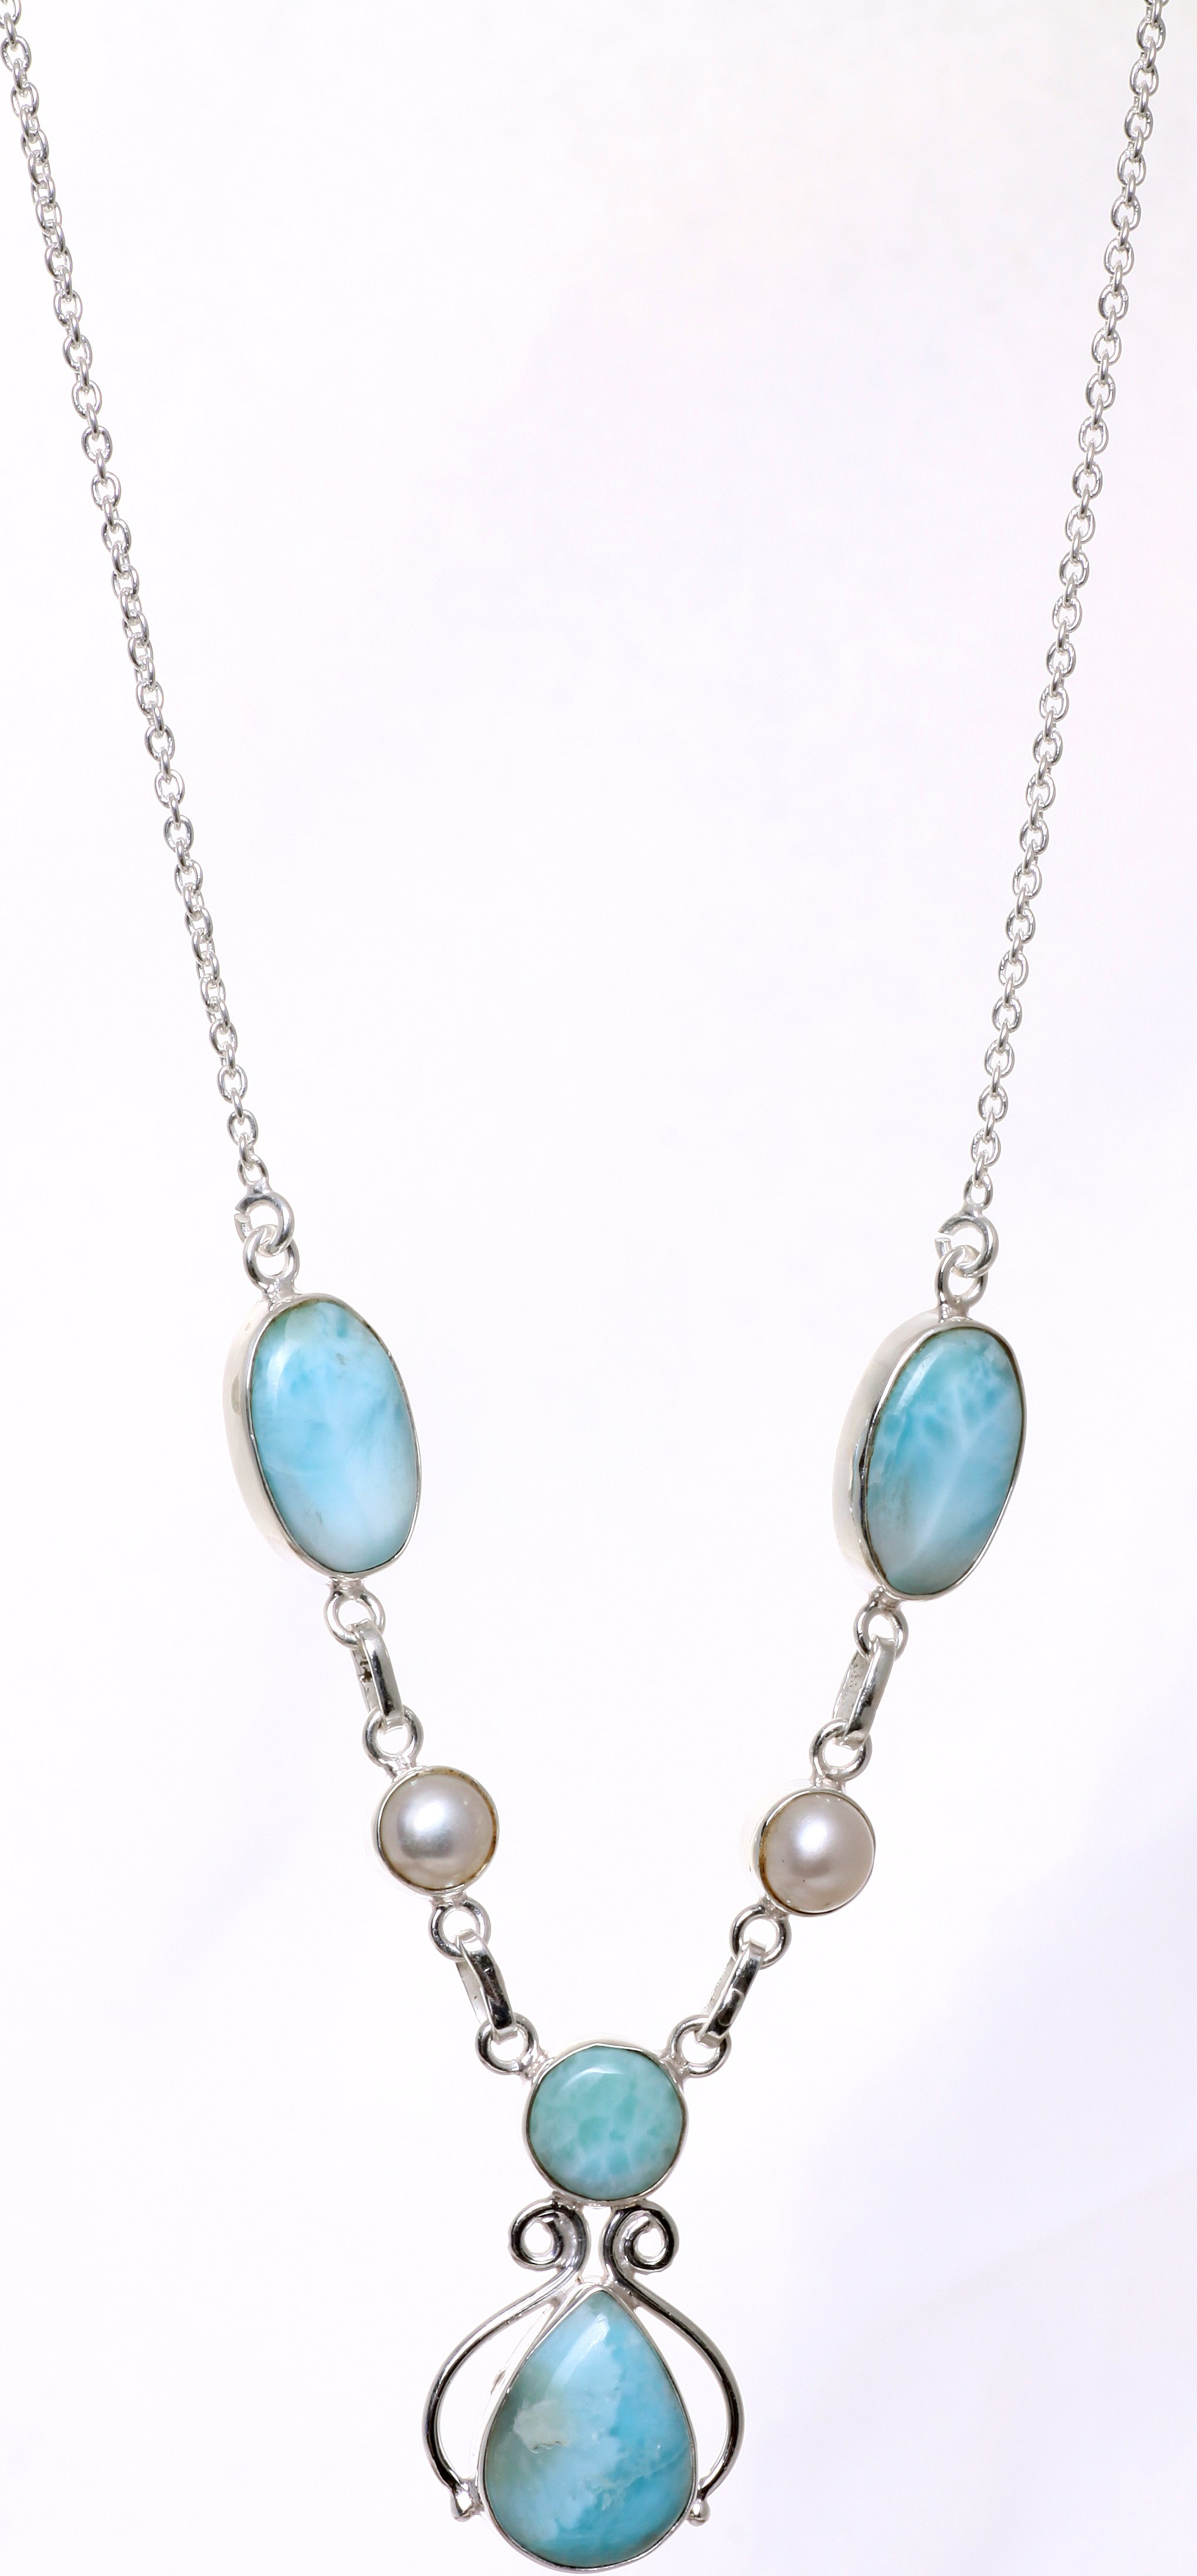 Larimar Necklace with Pearl | Exotic India Art